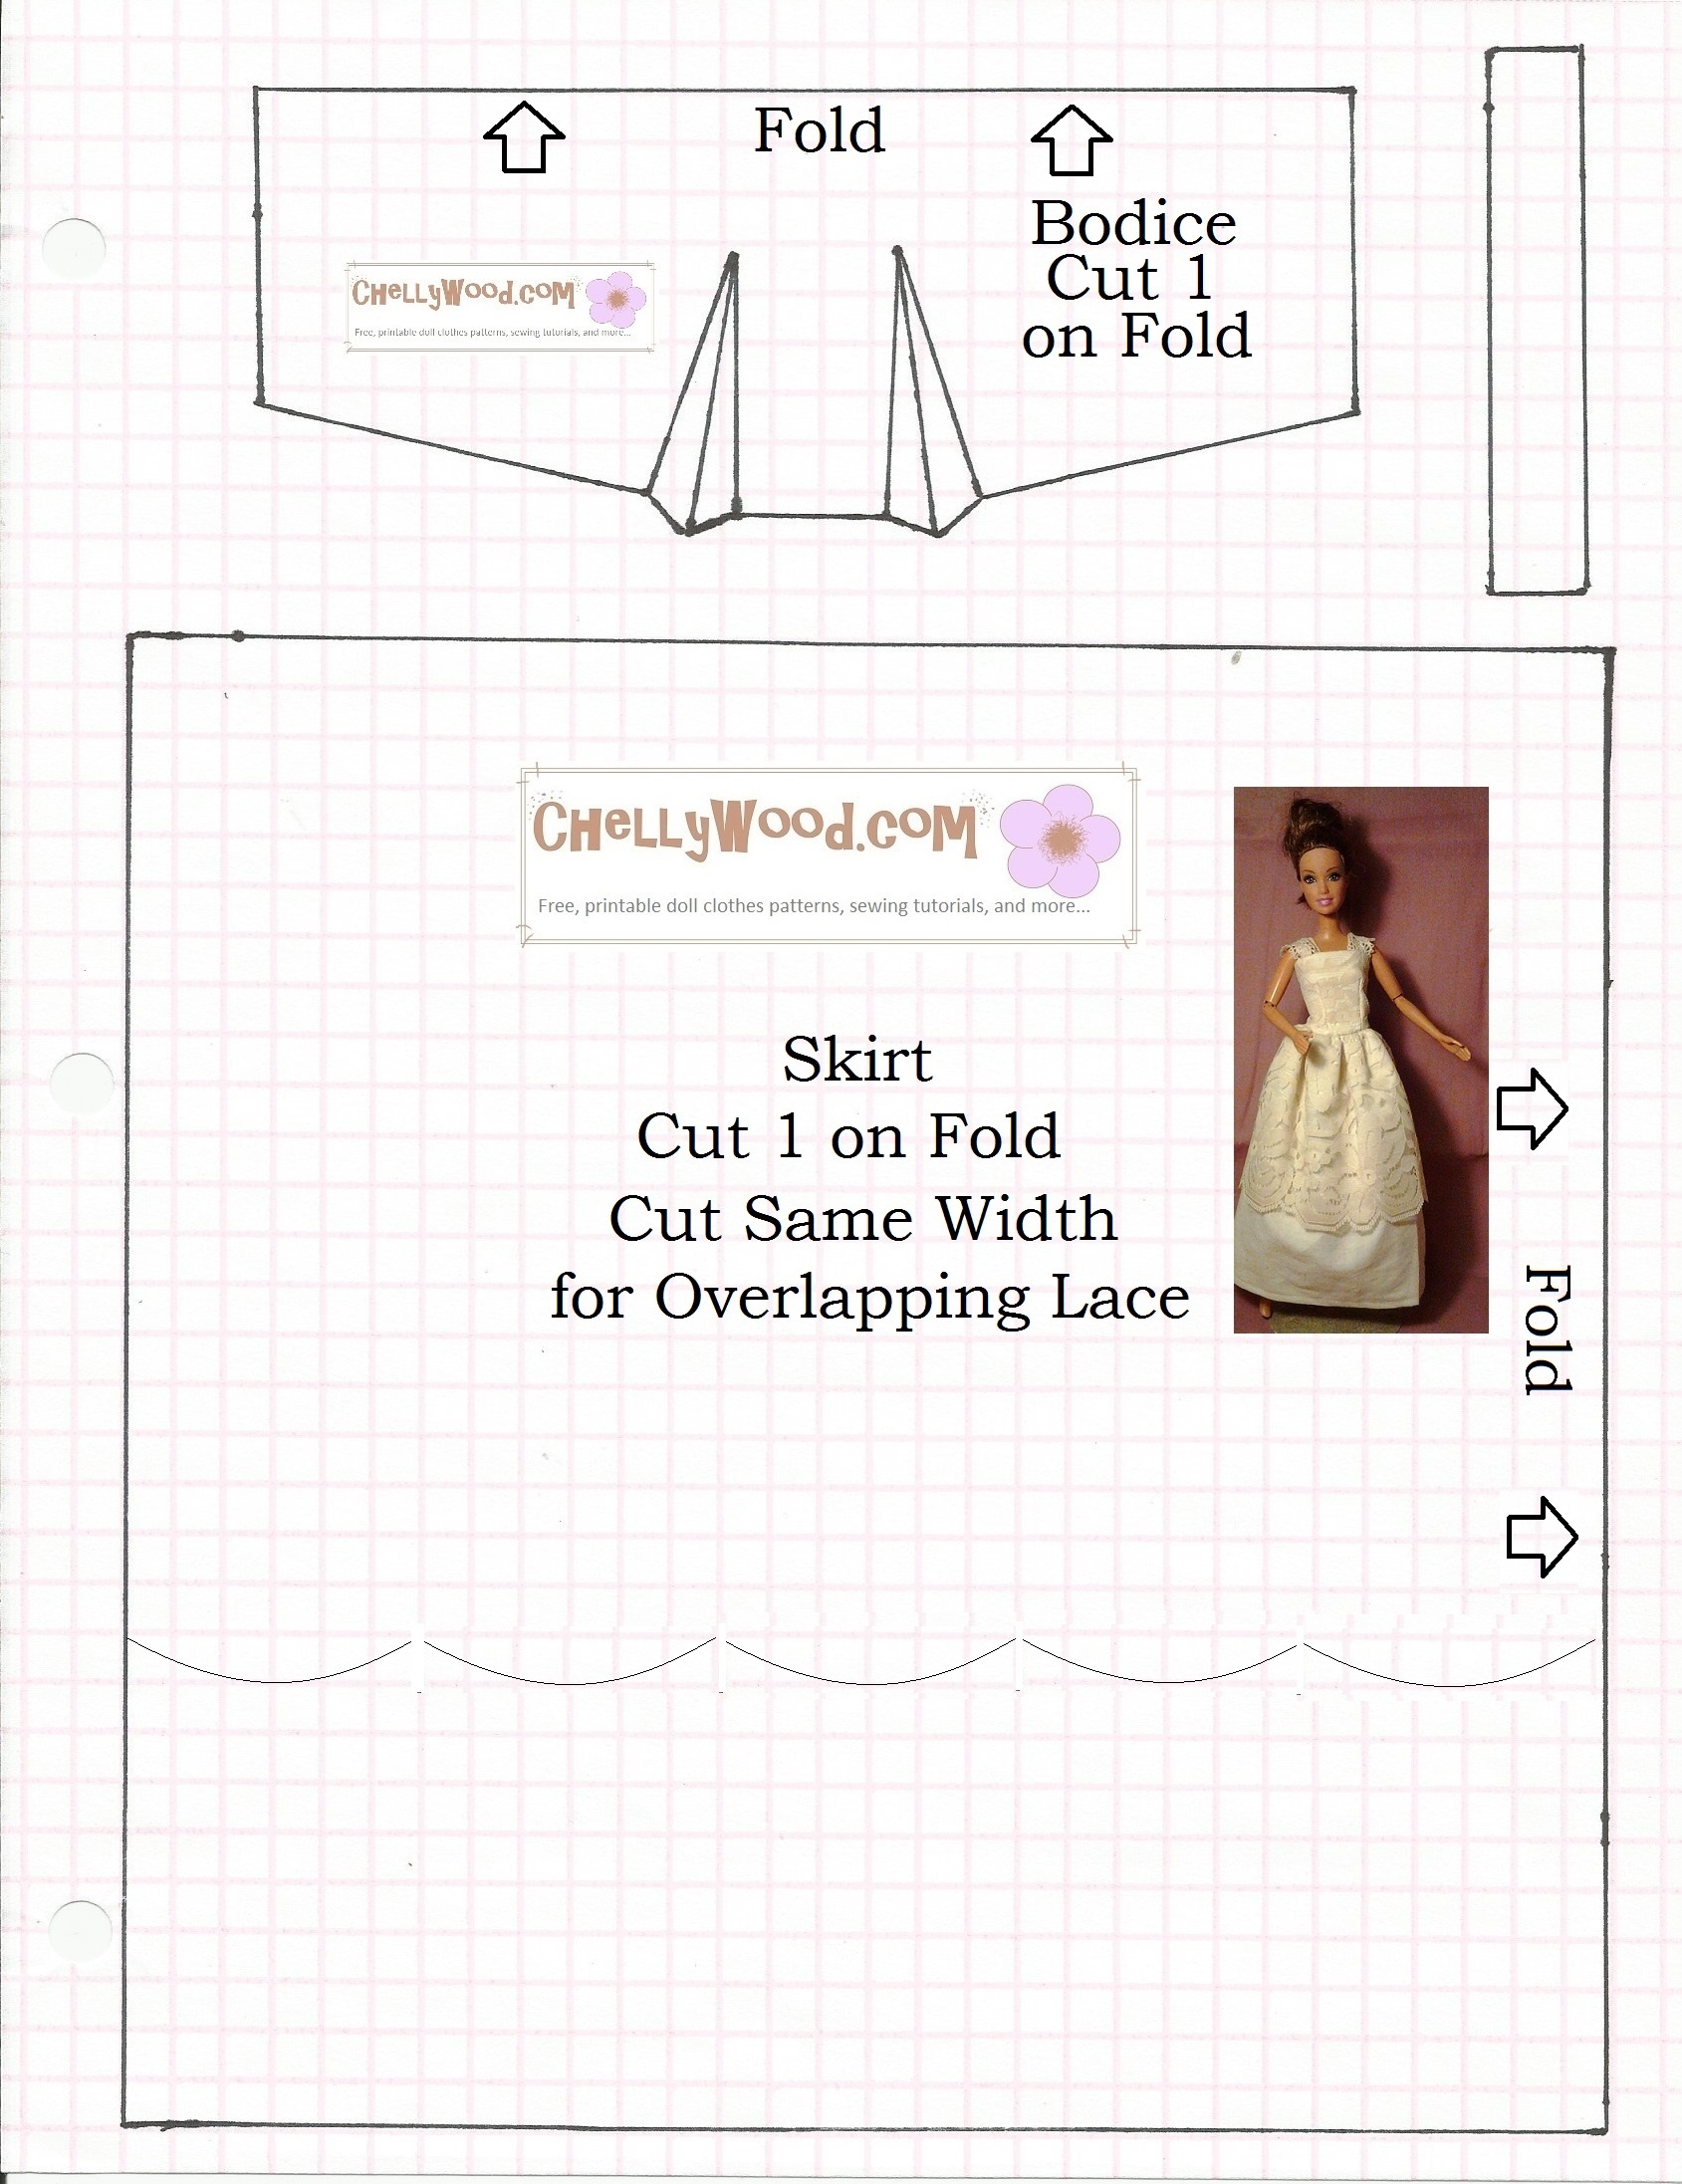 Old Pattern Page – Free, Printable Doll Clothes Sewing Patterns For - Free Printable Patterns For Sewing Doll Clothes